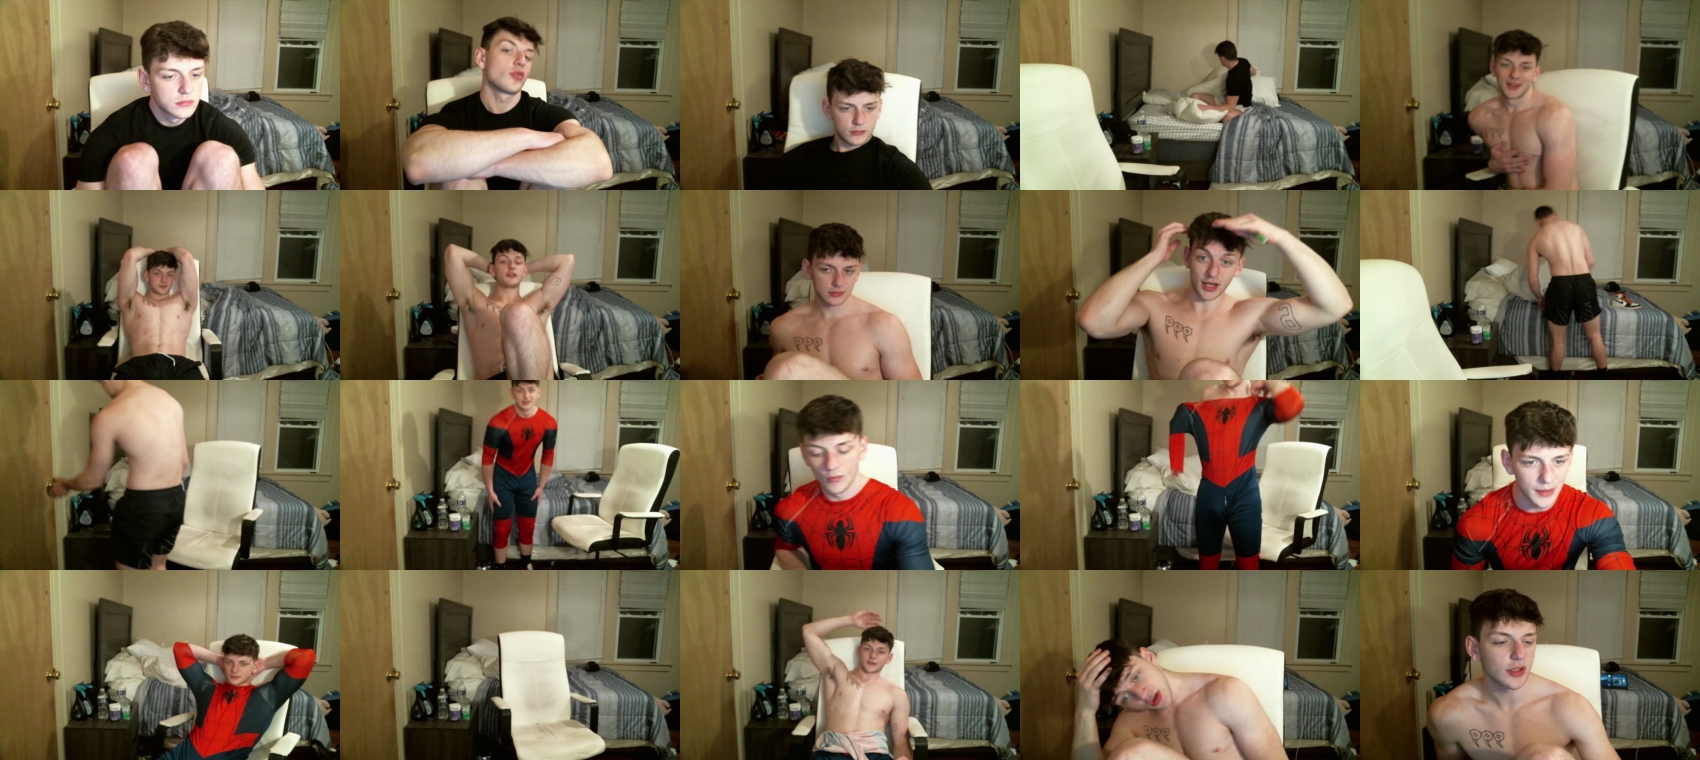 sexylax69 jerkoff CAM SHOW @ Chaturbate 09-05-2022